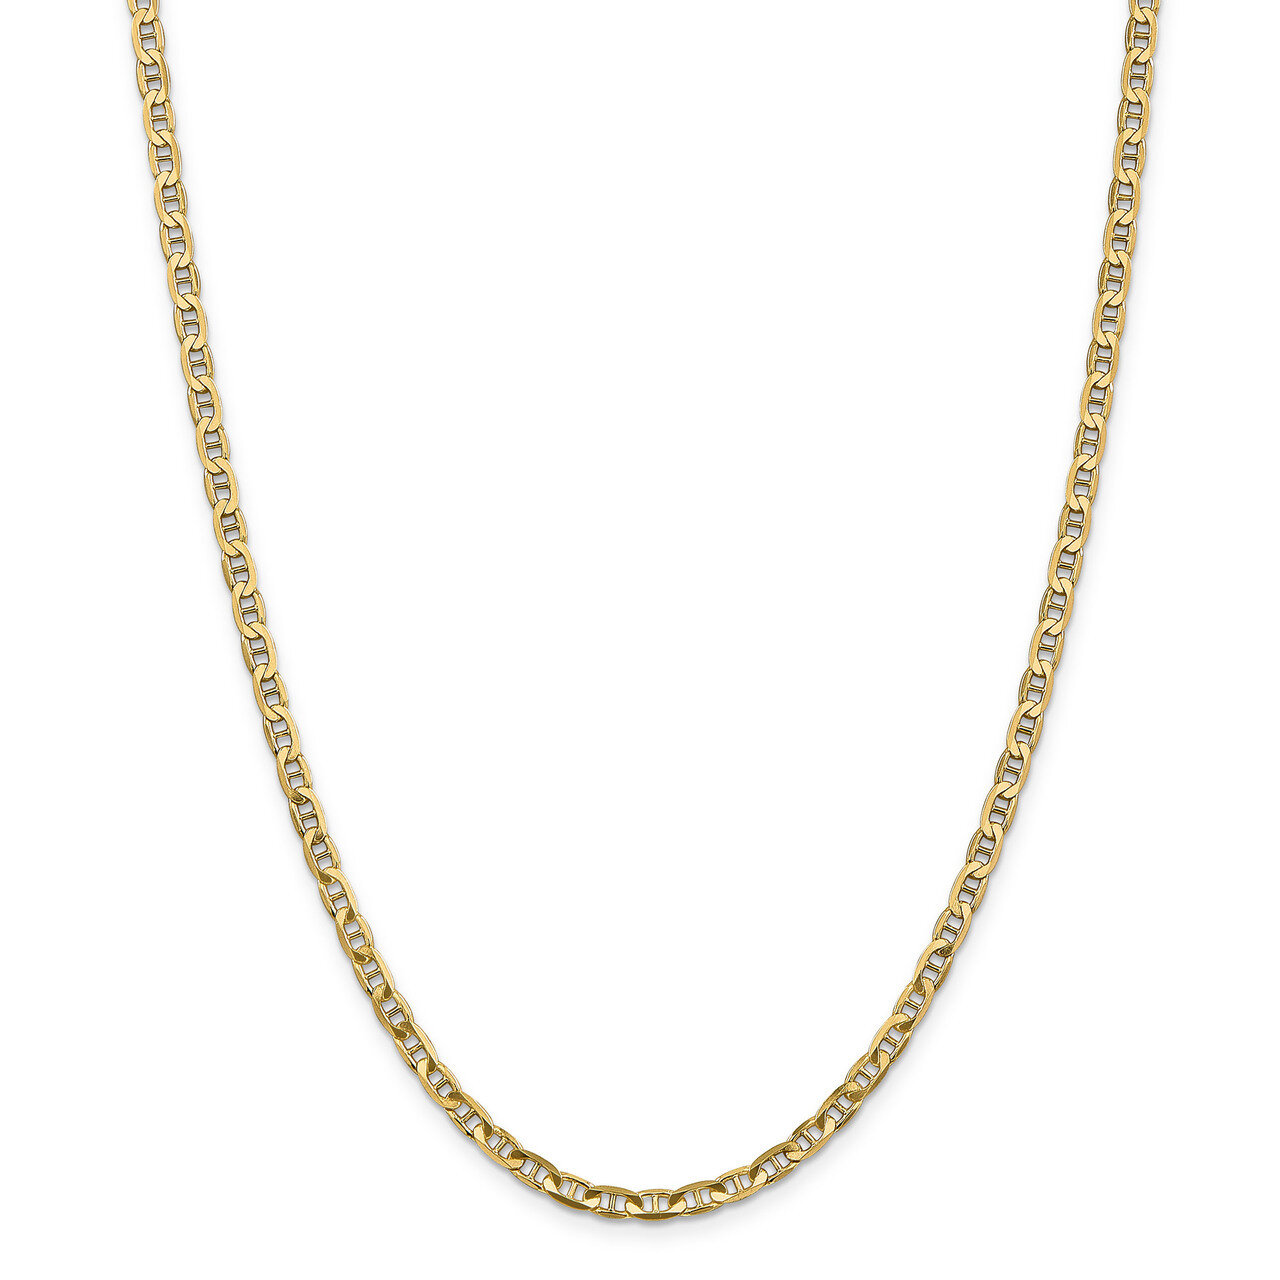 3.75mm Concave Anchor Chain 20 Inch 14k Gold HB-1315-20